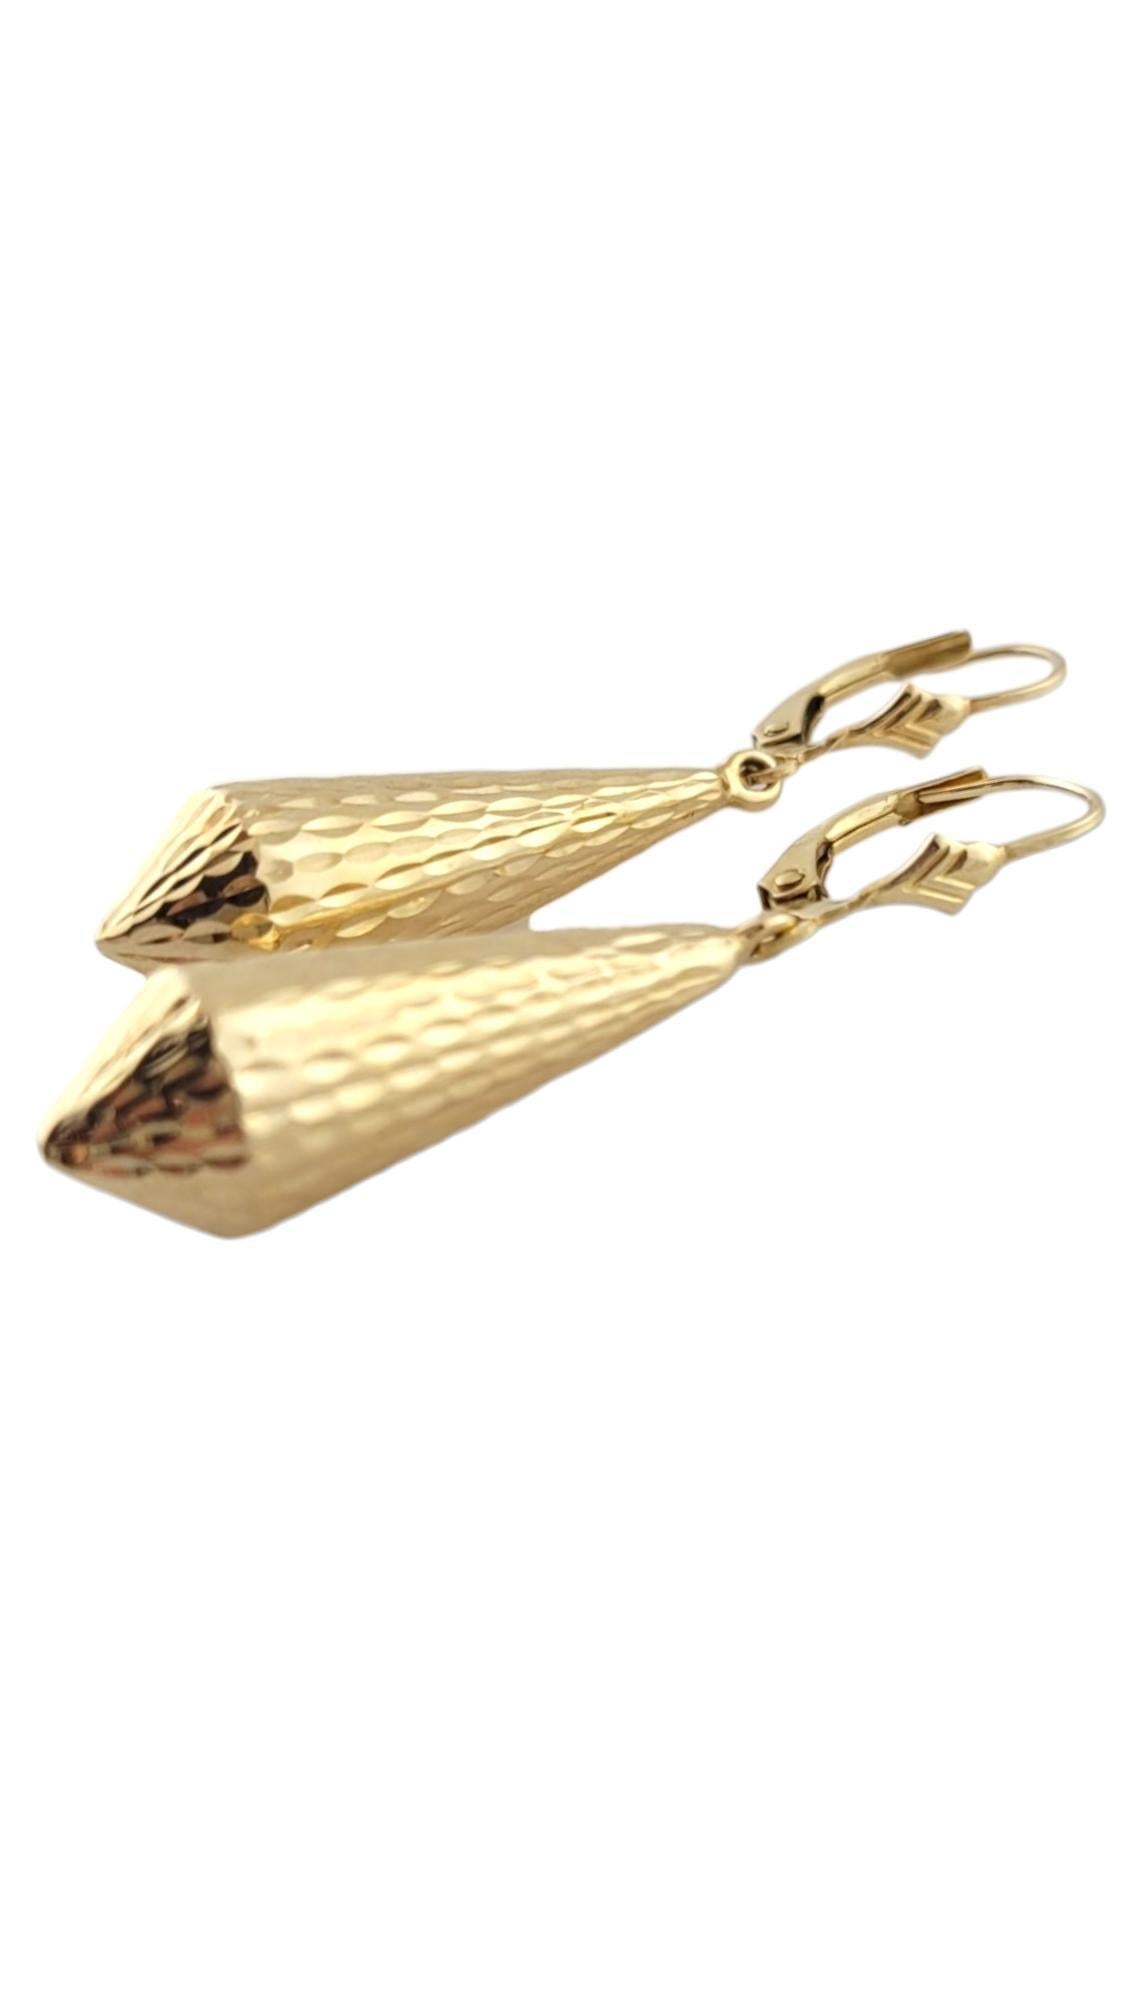 Vintage 14K Yellow Gold Textured Dangle Earrings 

This gorgeous set of textured dangle earrings are crafted from 14K yellow gold for a beautiful finish!

Size: 44.7mm X 10.27mm X 10.27mm

Weight: 2.5 g/ 1.6 dwt

Hallmark: 14K SLC

Very good